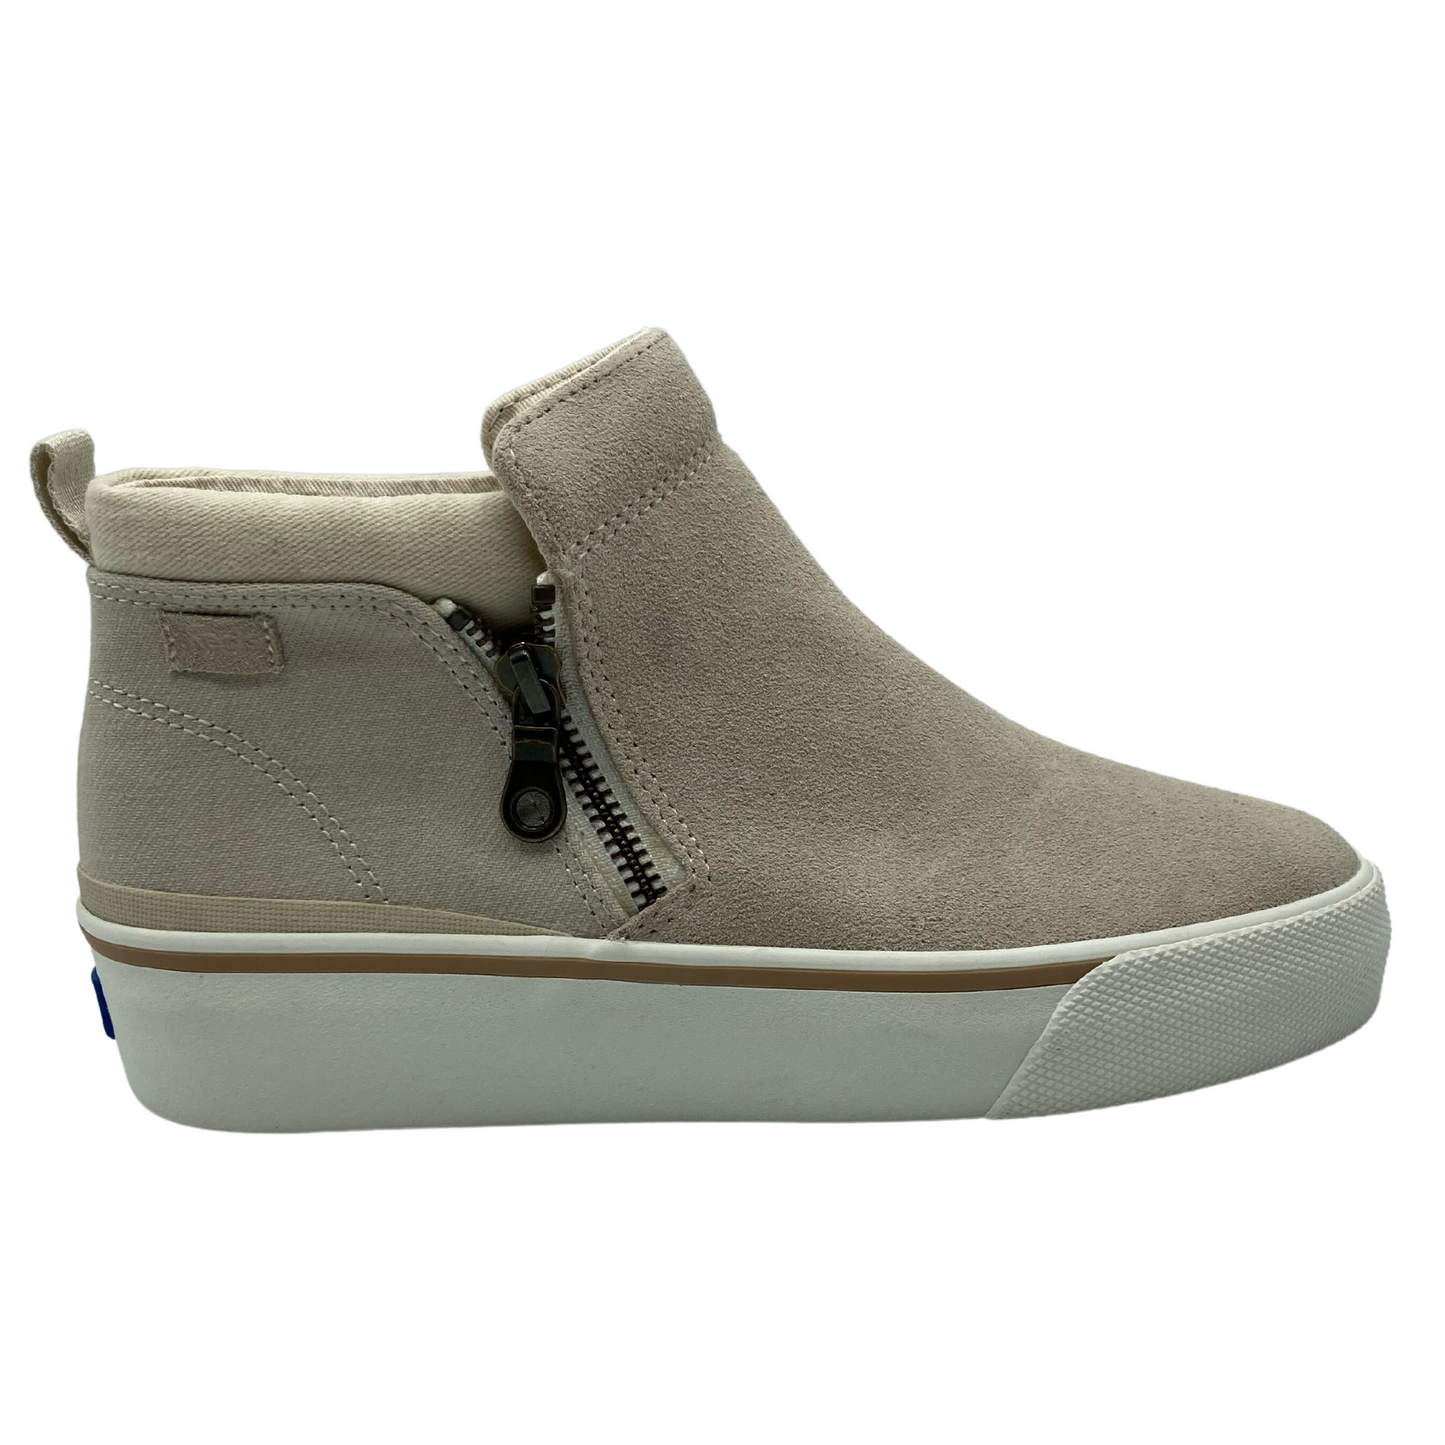 Right facing view of latte suede bootie with side zipper closure and white rubber outsole